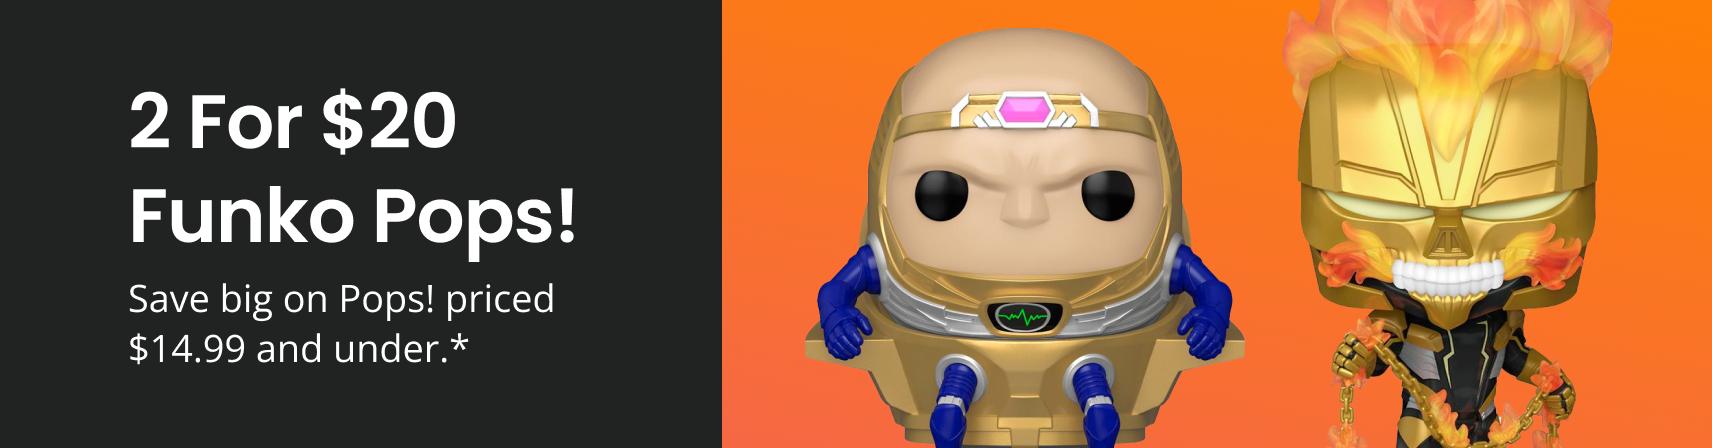 2 For $20 Funko Pops! Priced $14.99 And Under*